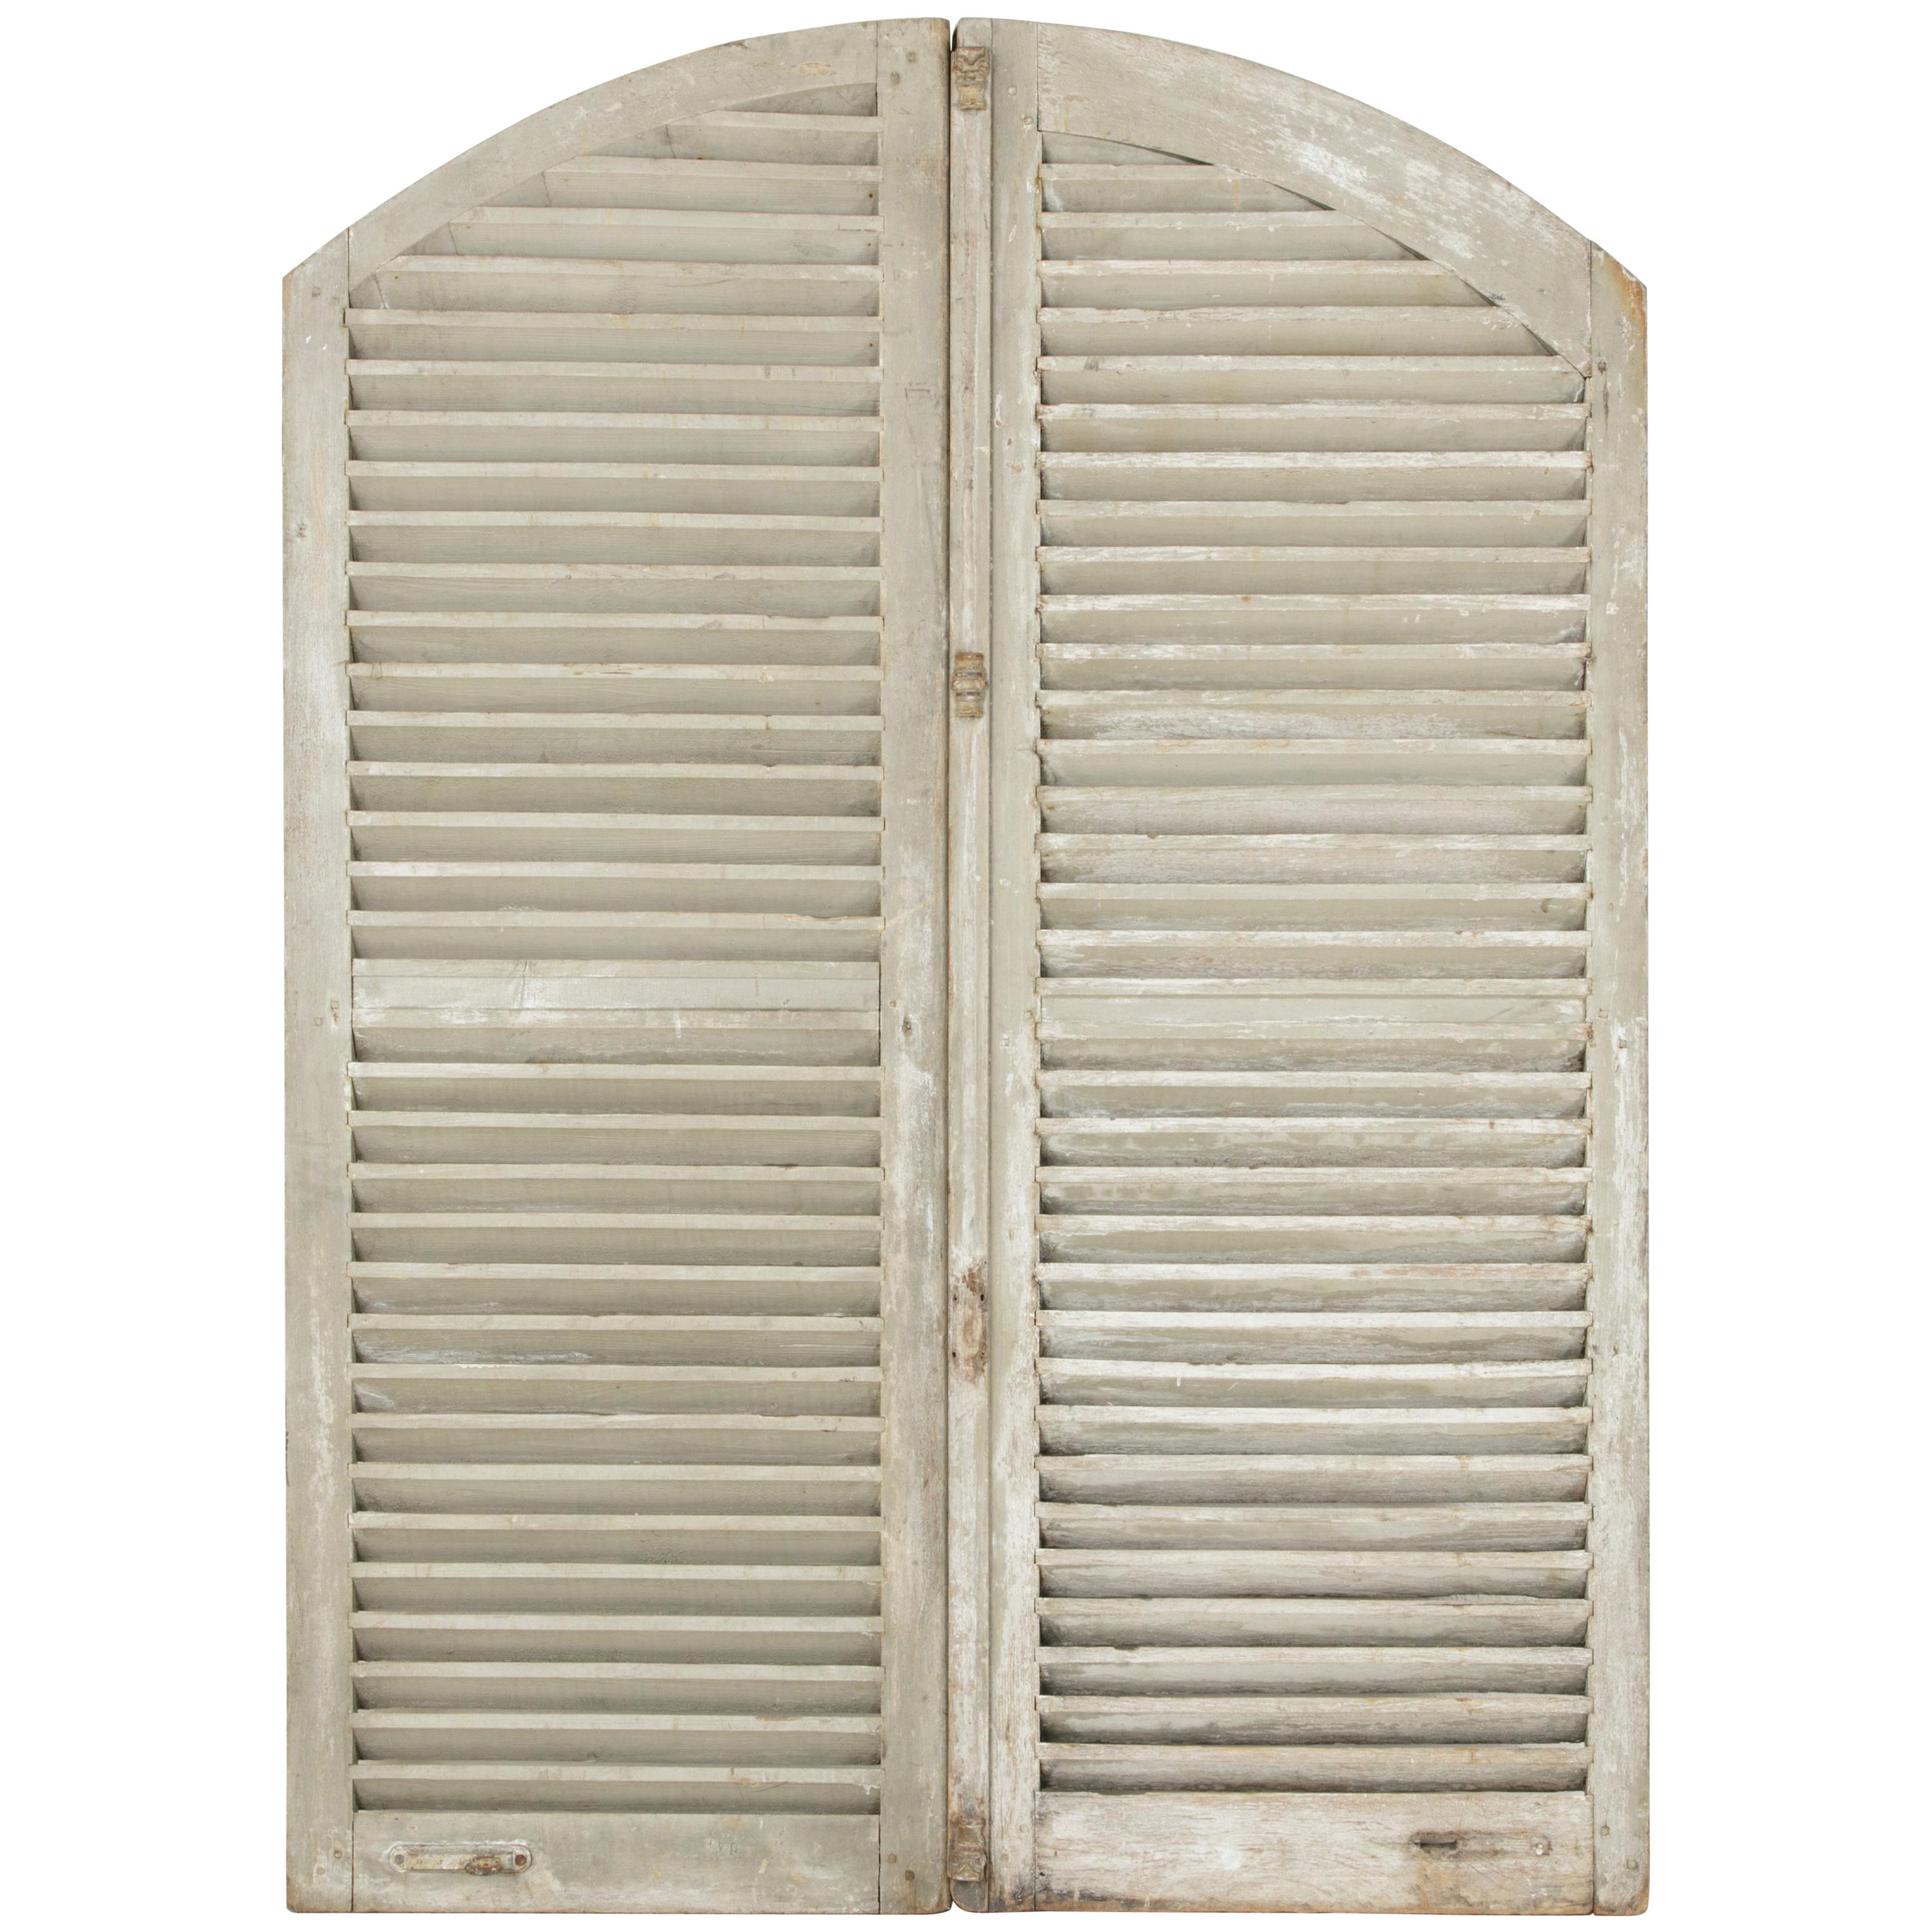 Pair of Early 20th Century Tall French Shutters with Arched Top, Headboard